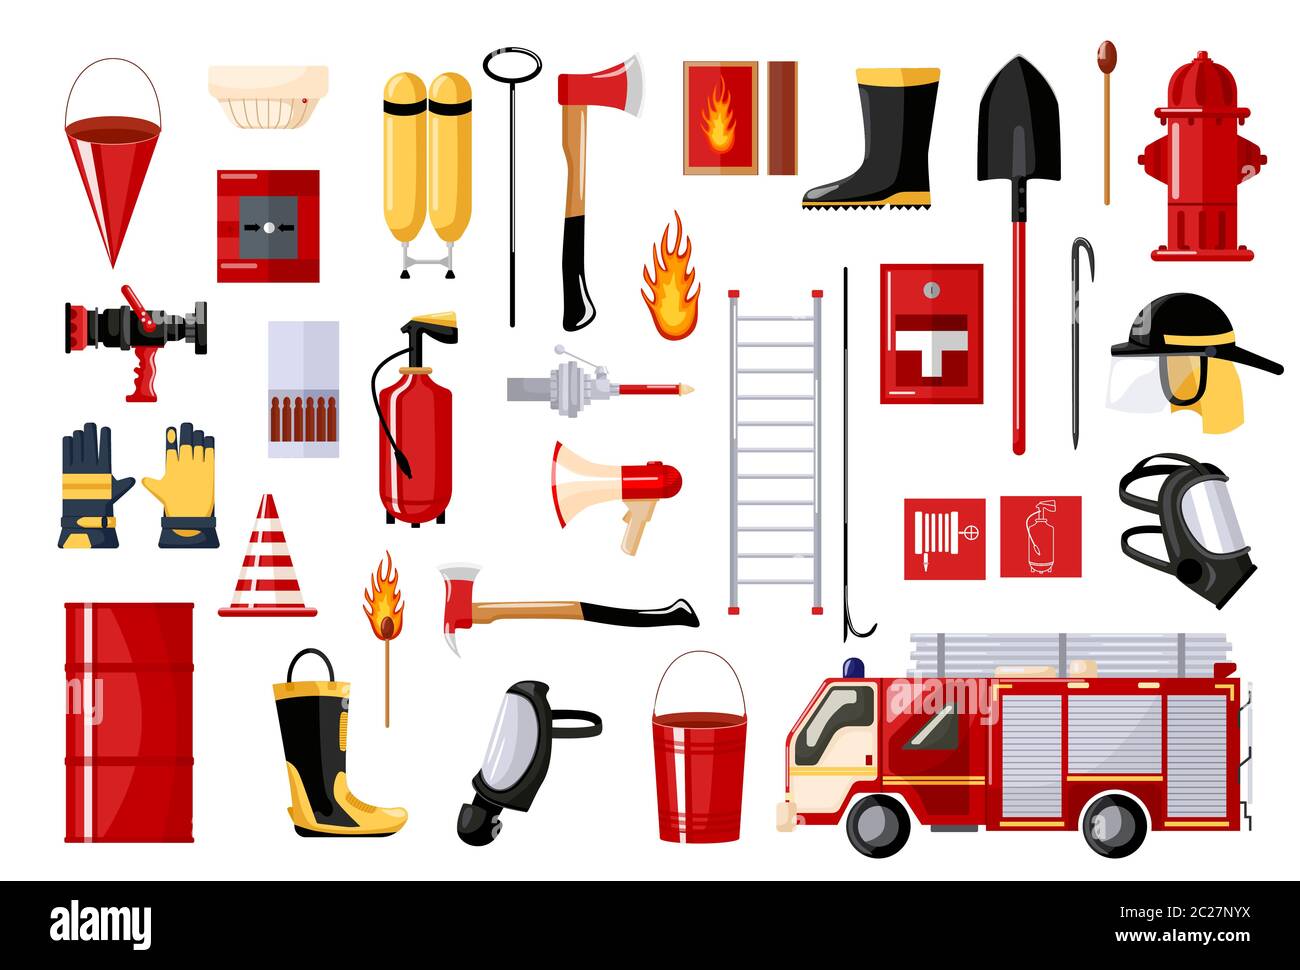 Set of fireman on white background. Fire fighting vehicle and hydrant, helmet, hose, extinguisher, ladder, gas mask. Flat style vector illustration. Stock Vector